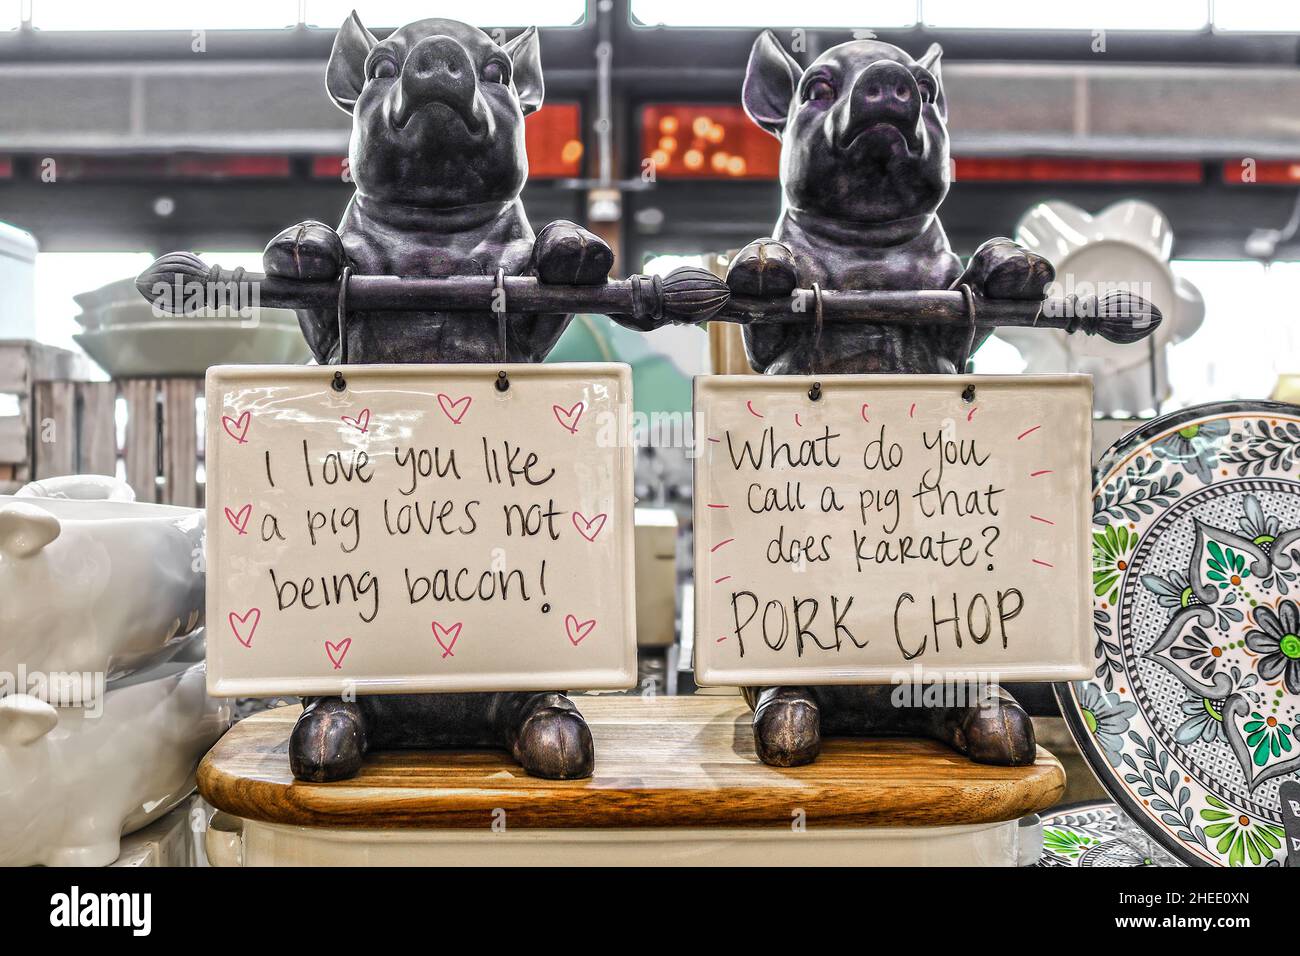 Cast iron pig signholders on display - bacon and pork chop -Humor - kitchenware Stock Photo